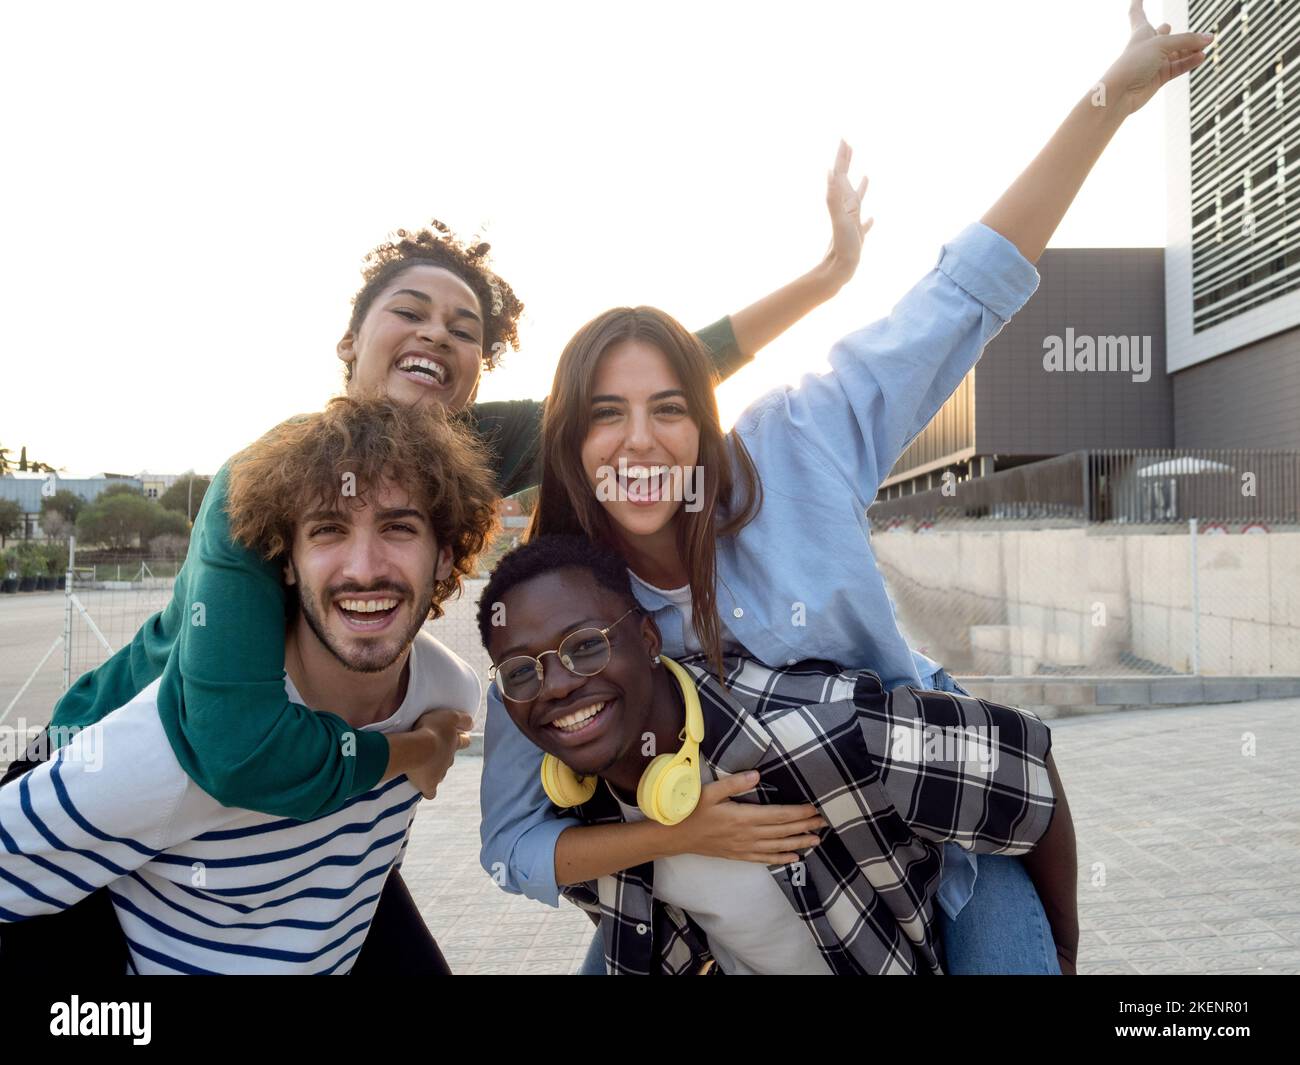 Group of multi-ethnic young friends having a good time during a sunset in the city. Best friends Stock Photo